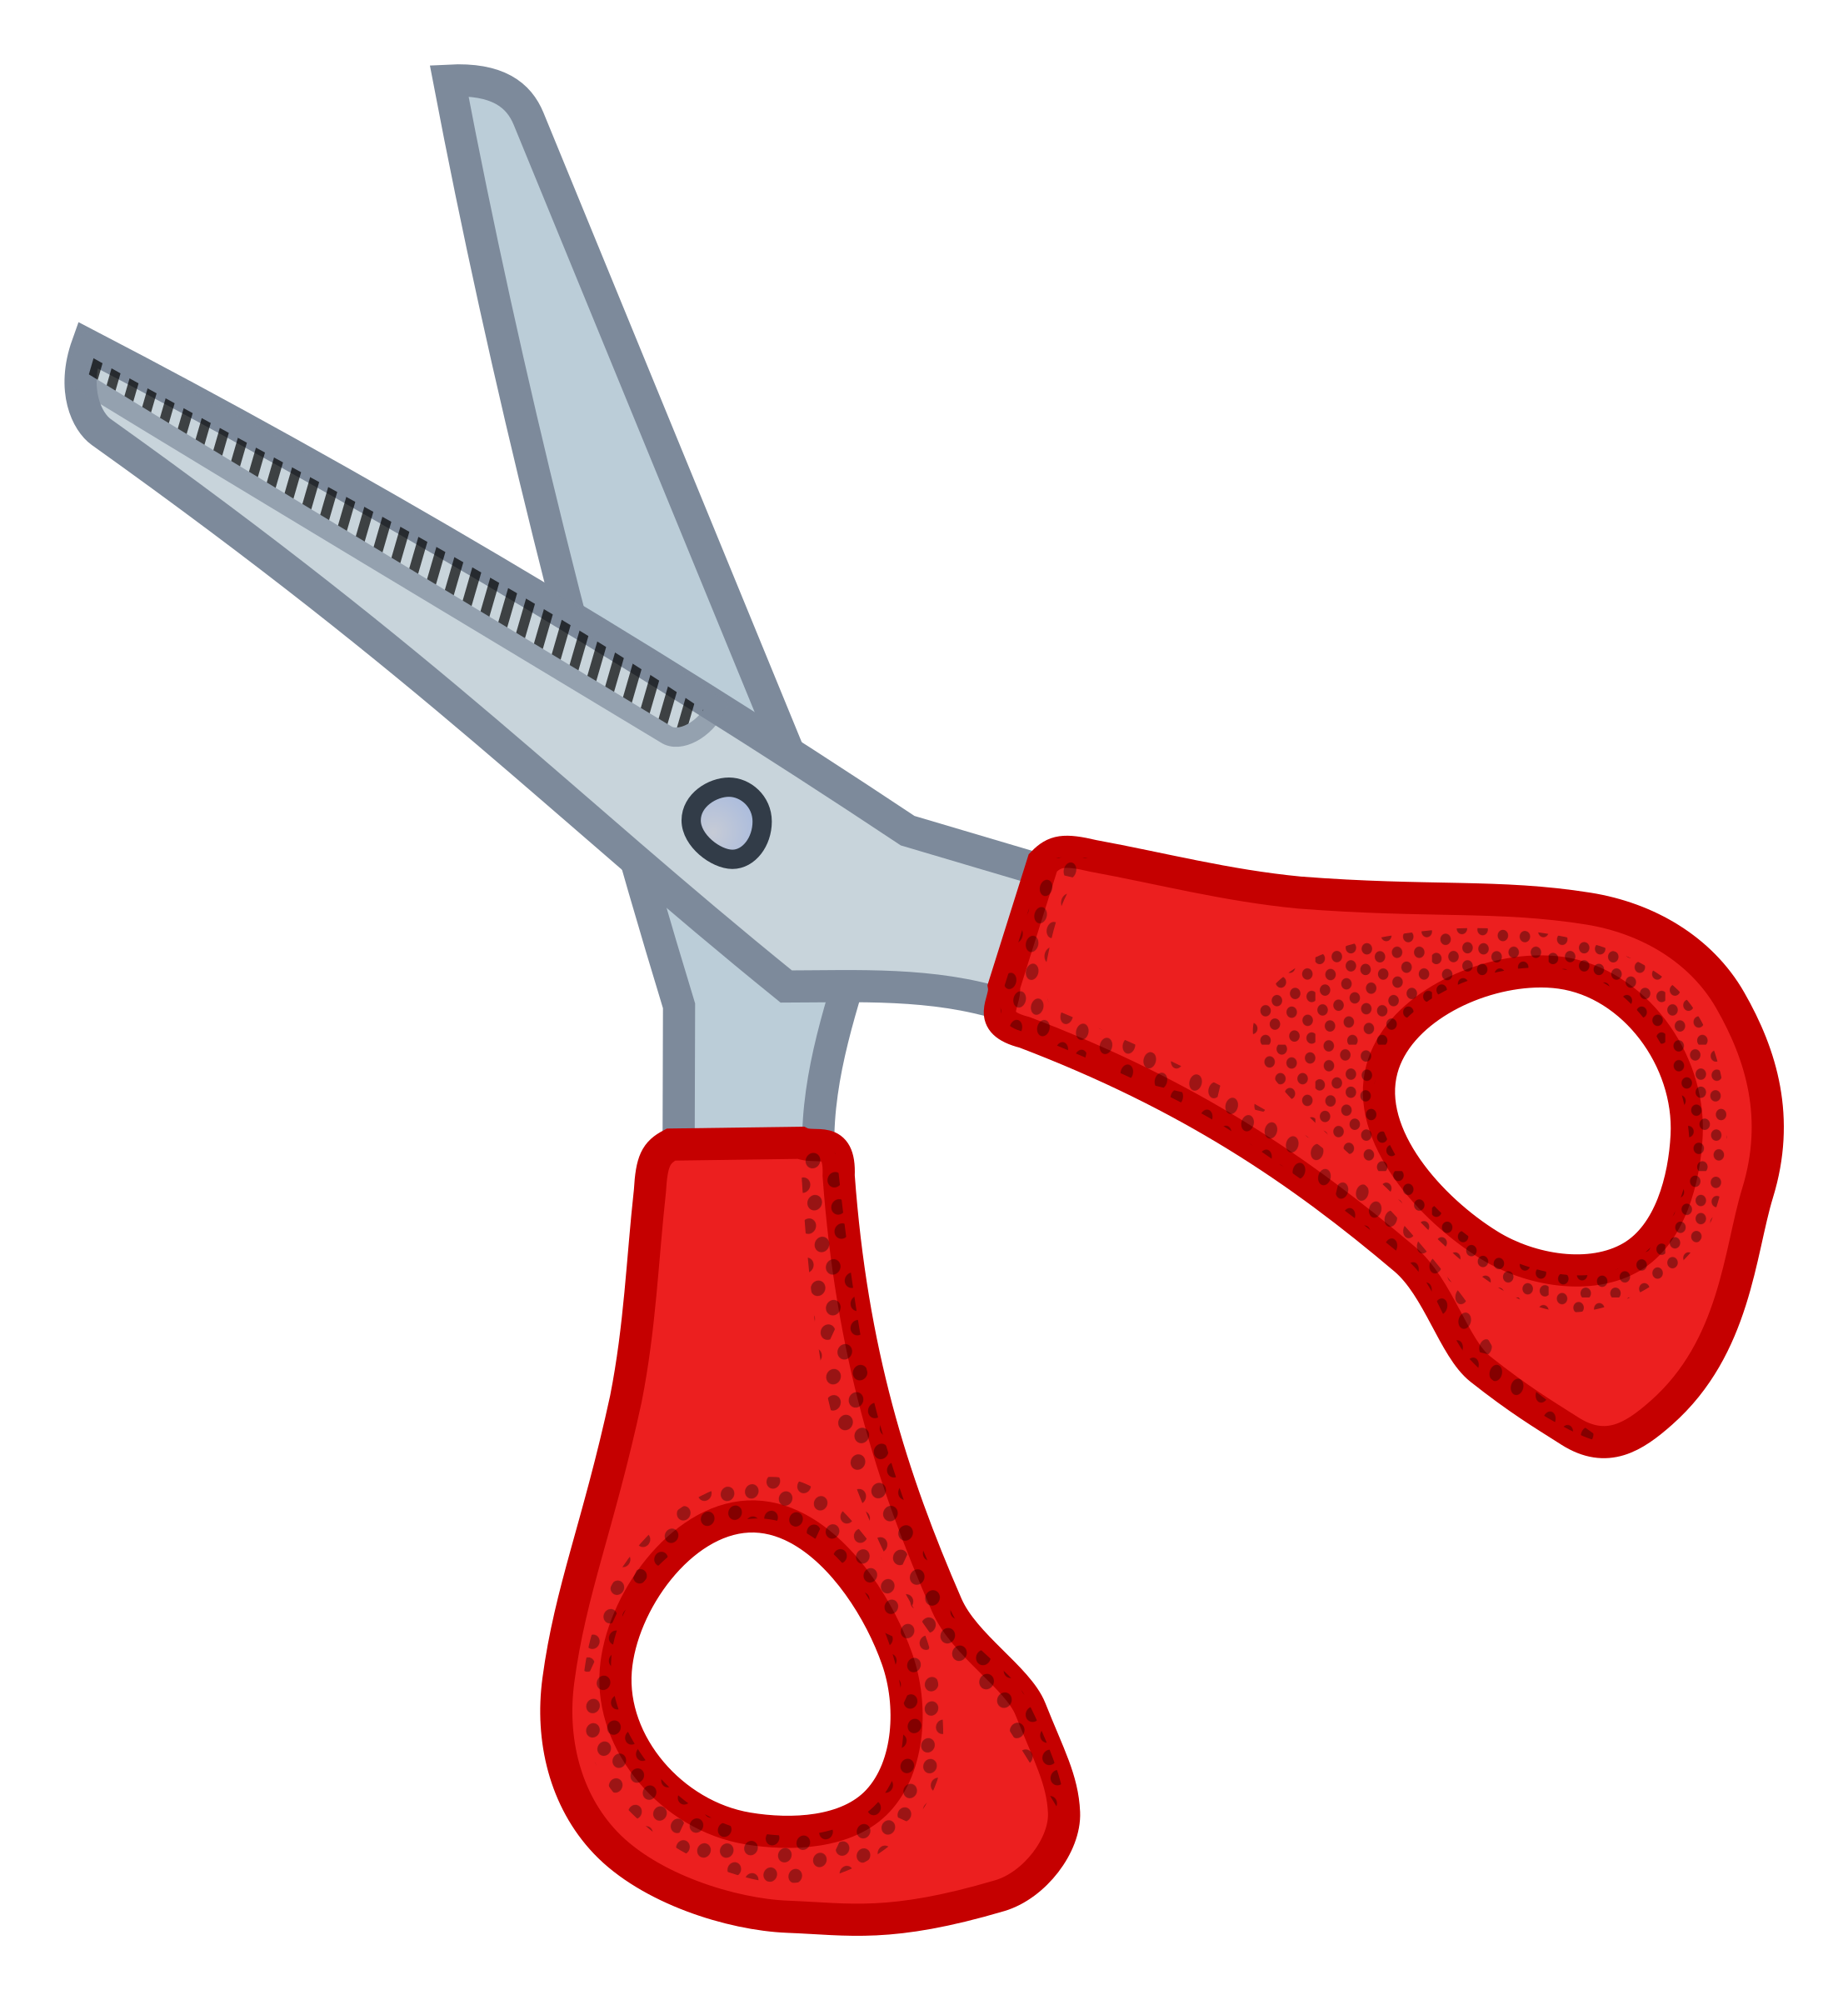 shears clipart transparent background